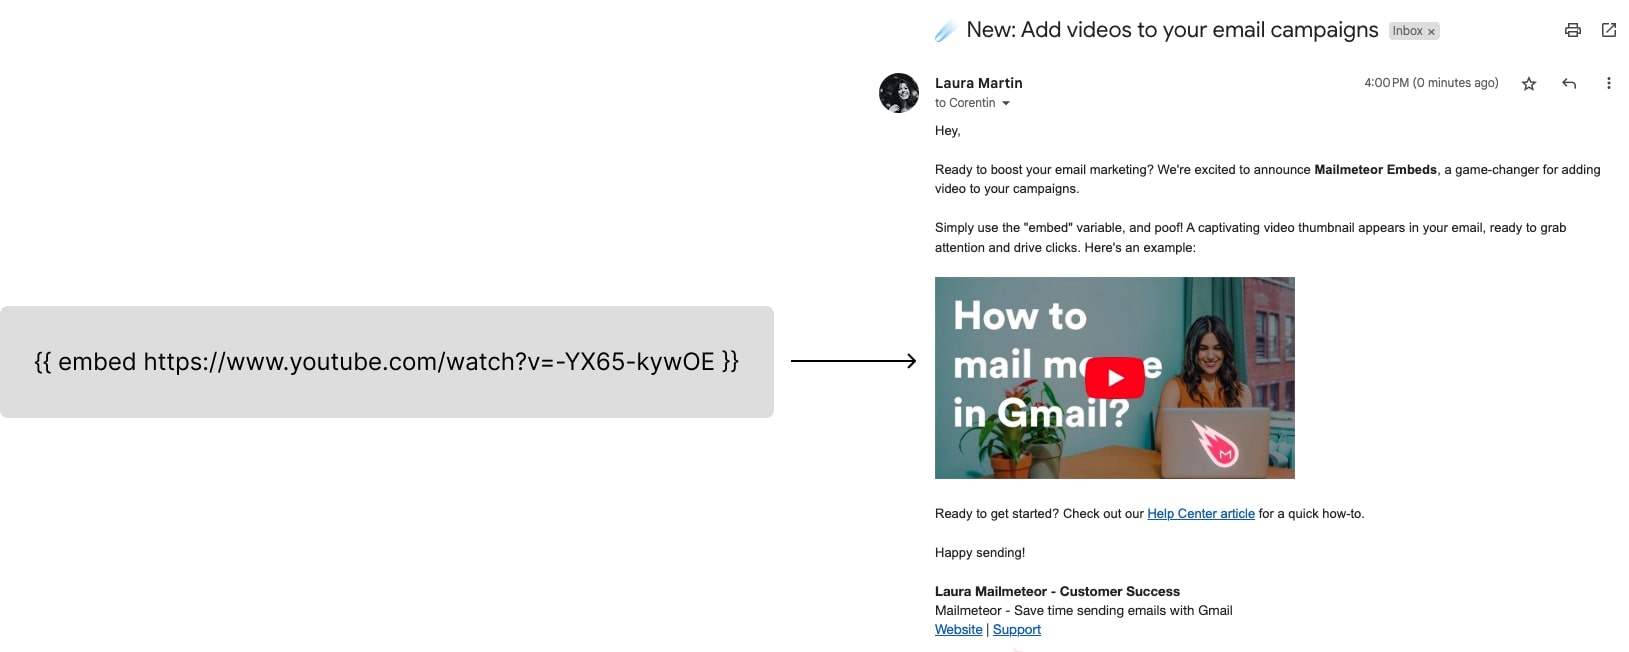 Mailmeteor lets you embed videos in your bulk emails using a special merge tag